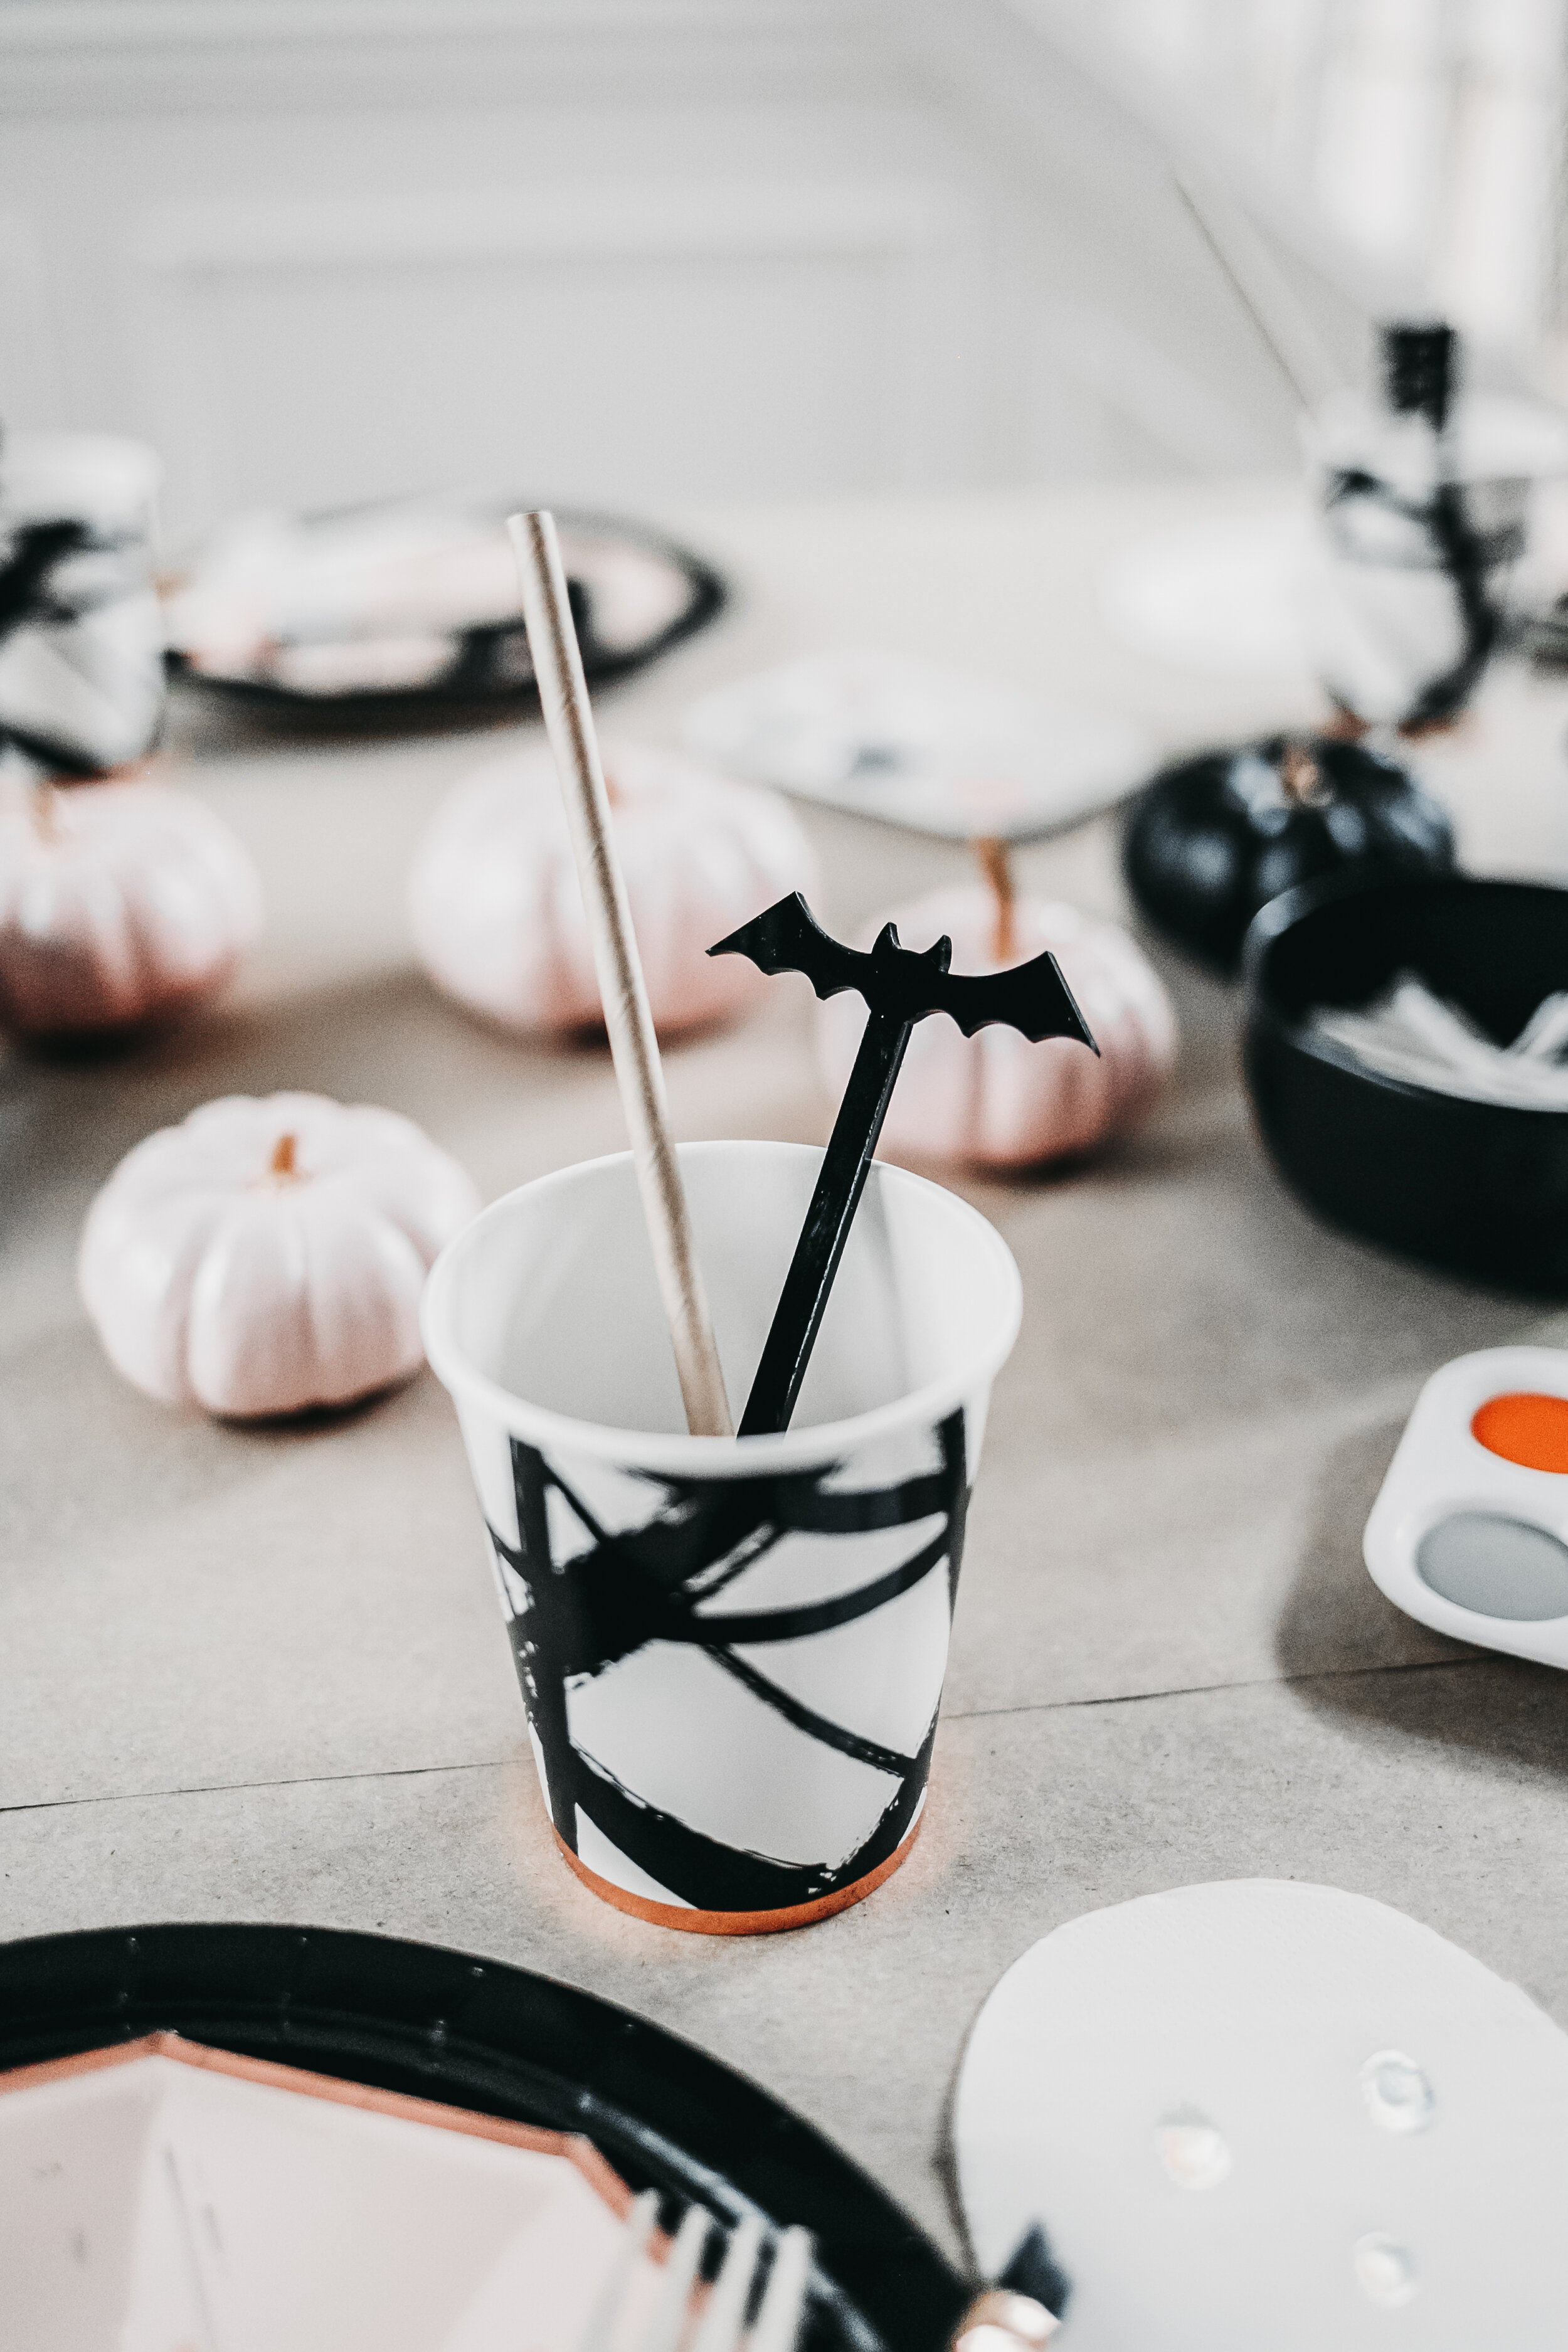 Pumpkin painting party